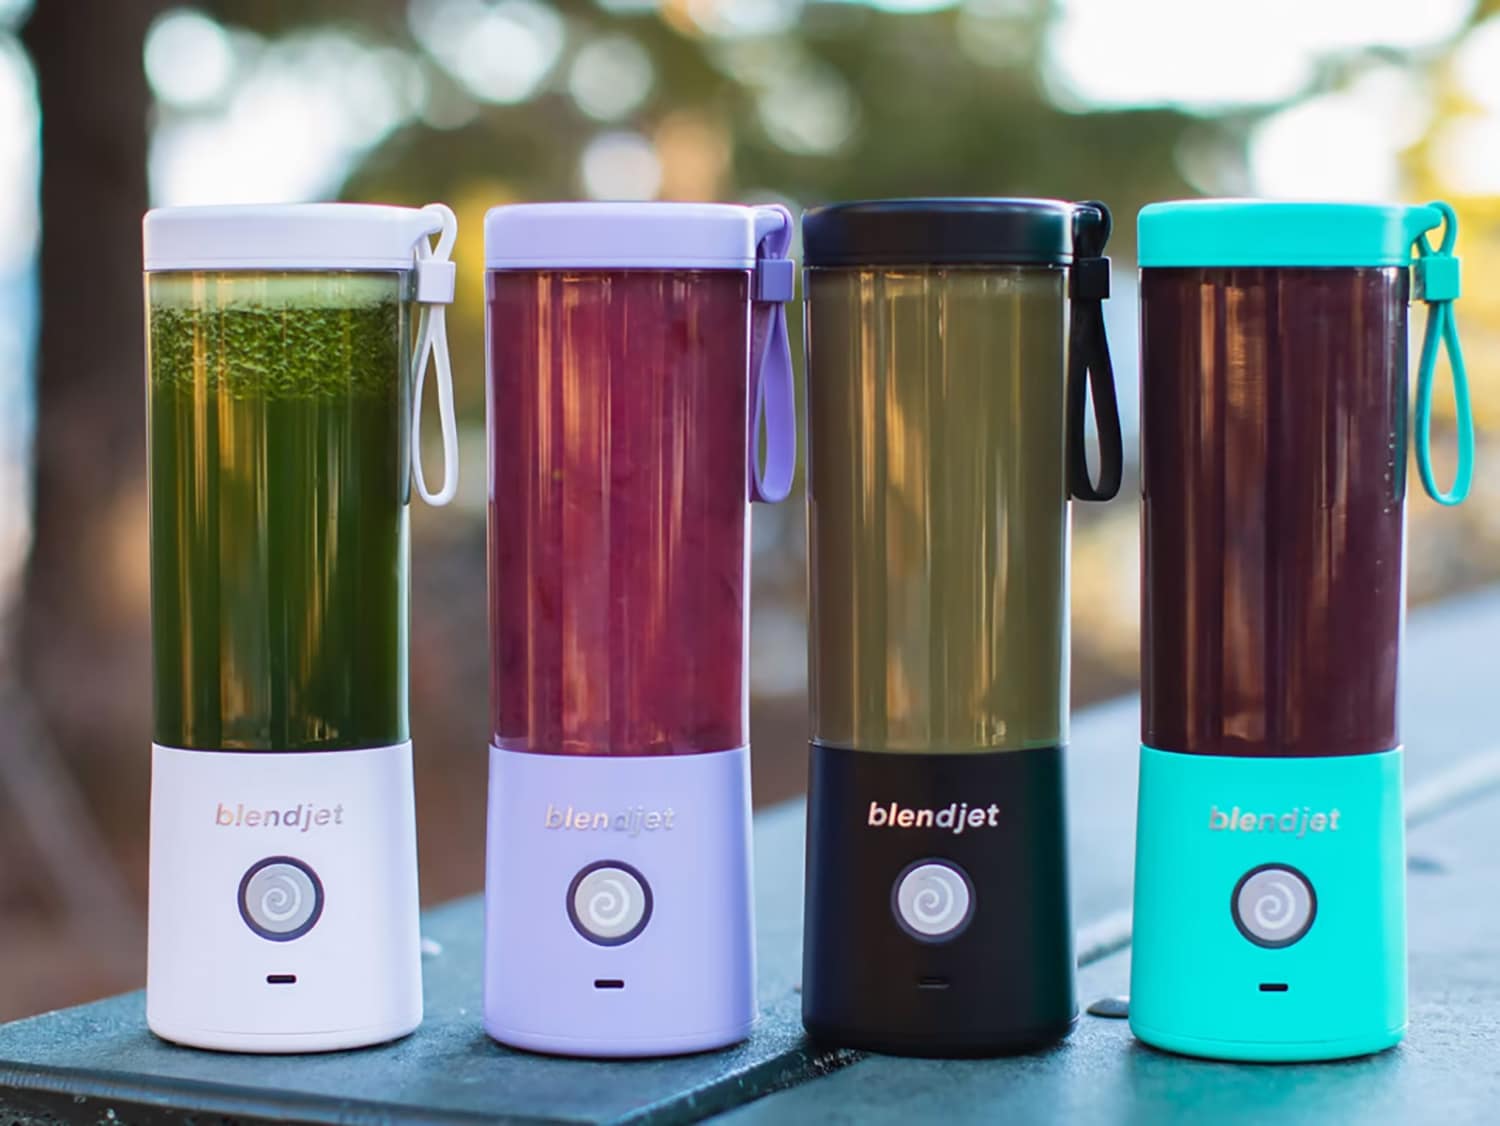 A variety of Blendjet2 portable blenders in different colors.